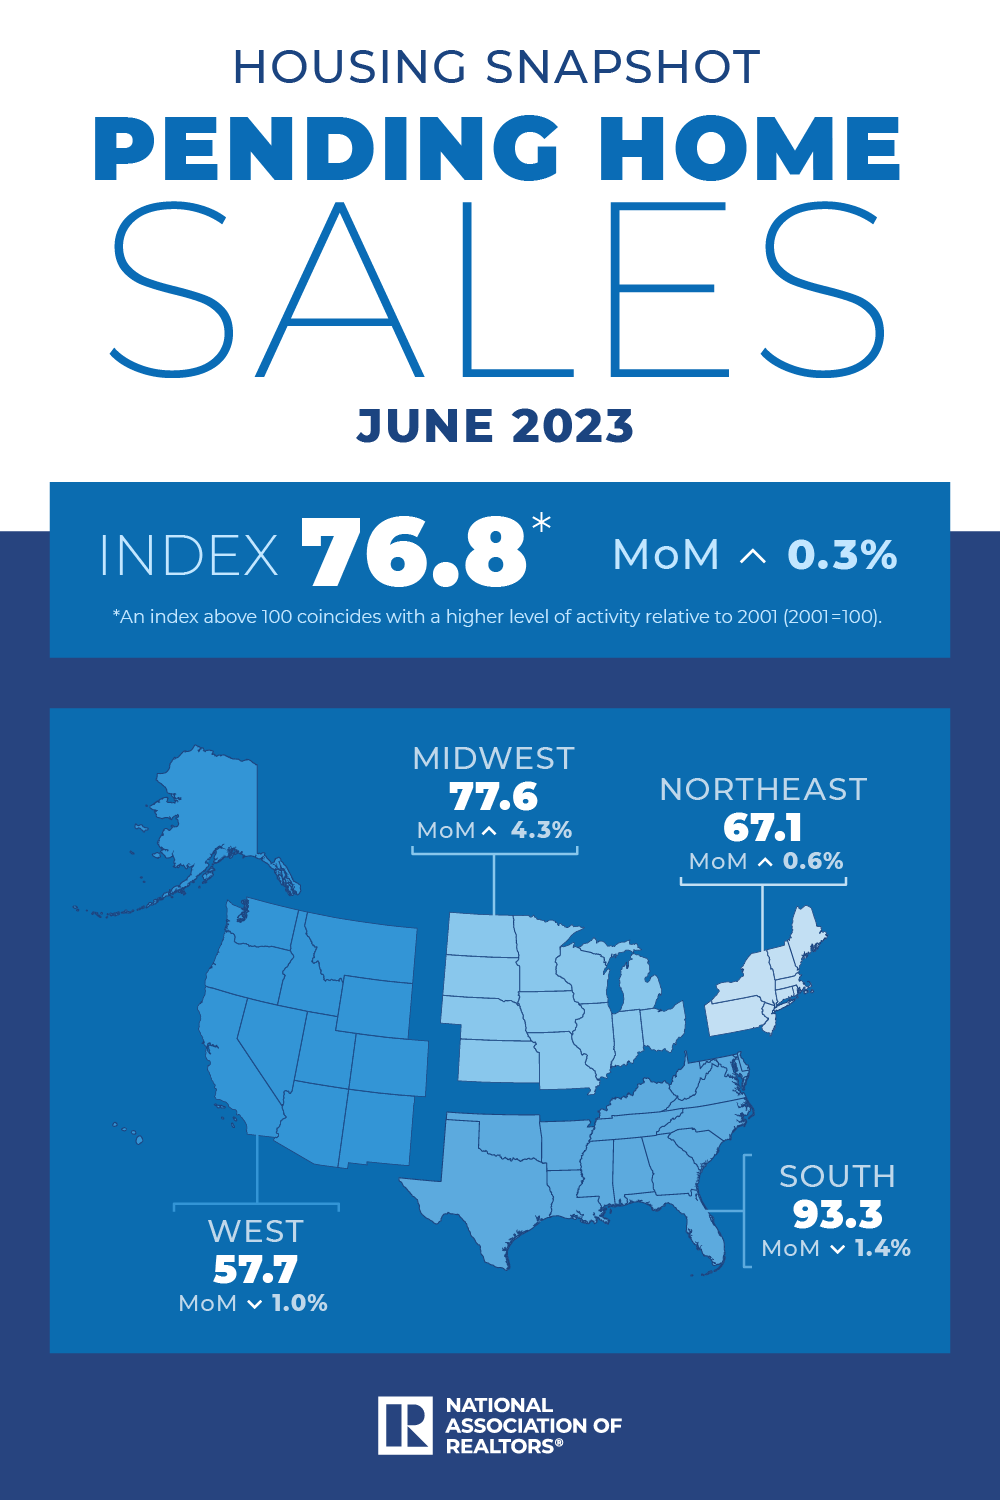 A map of the U.S. on a gradient color scale showing a snapshot of pending home sales for June 2023.